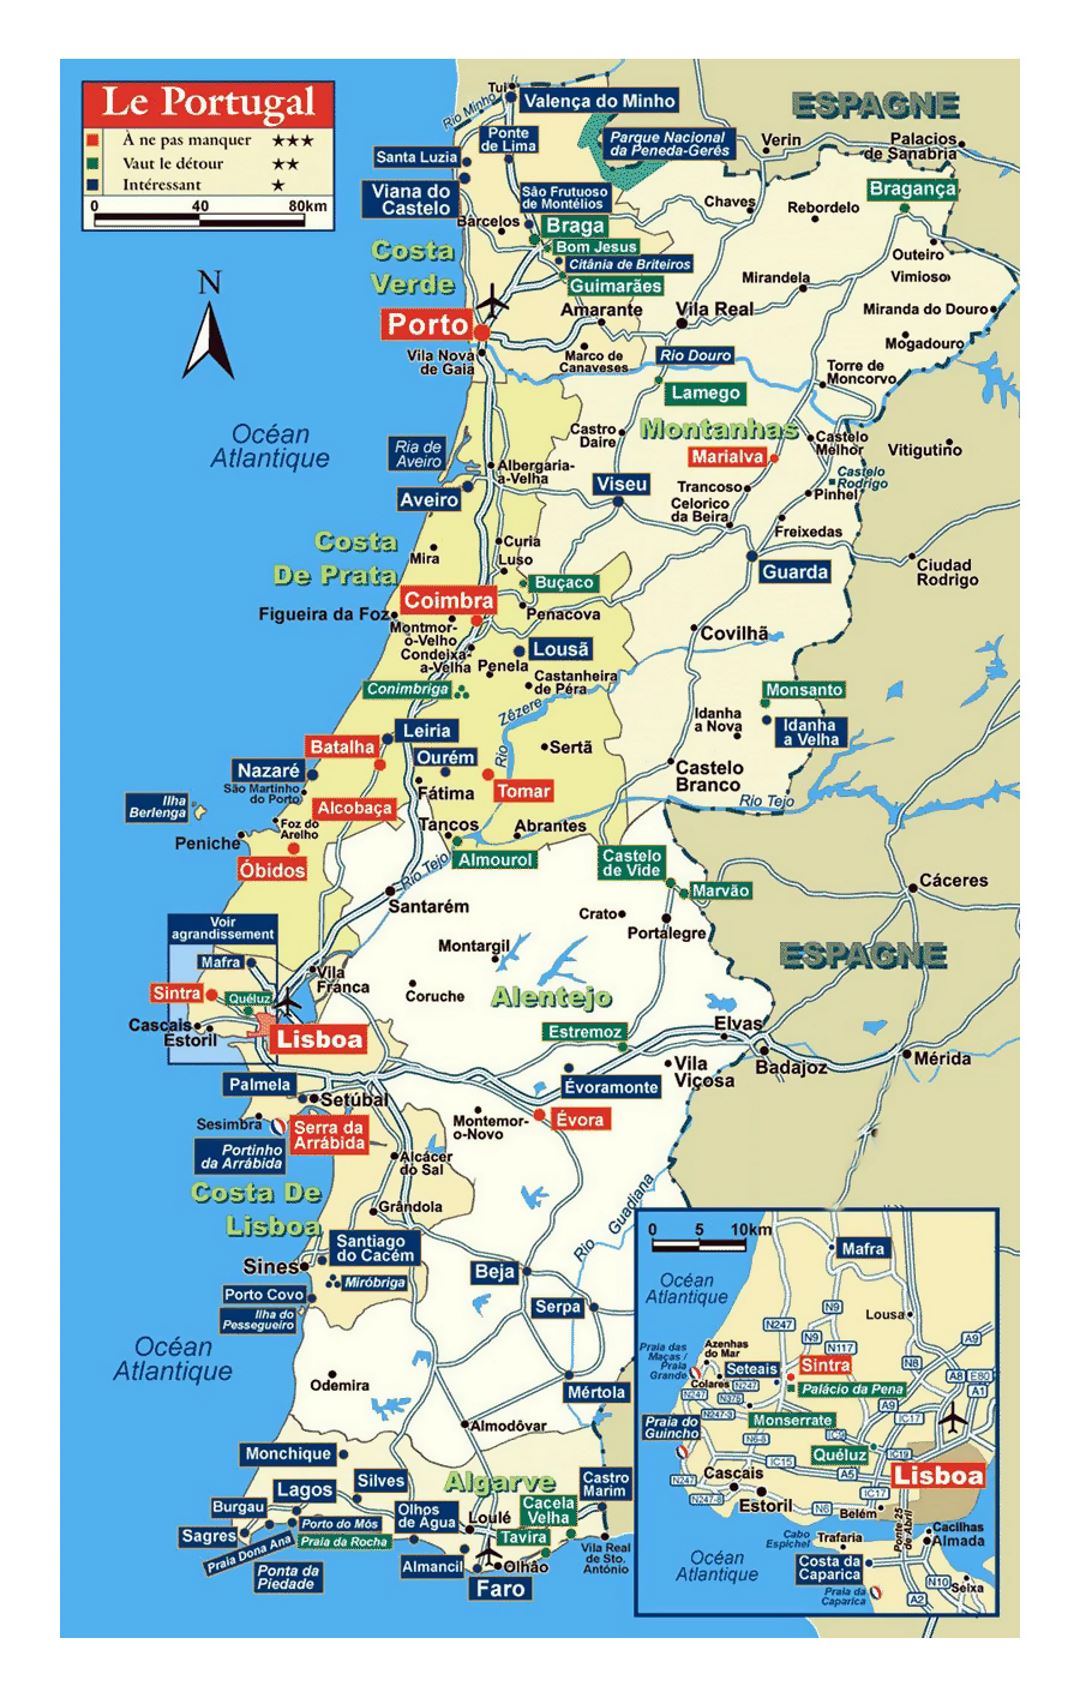 Detailed map of Portugal with roads and other marks